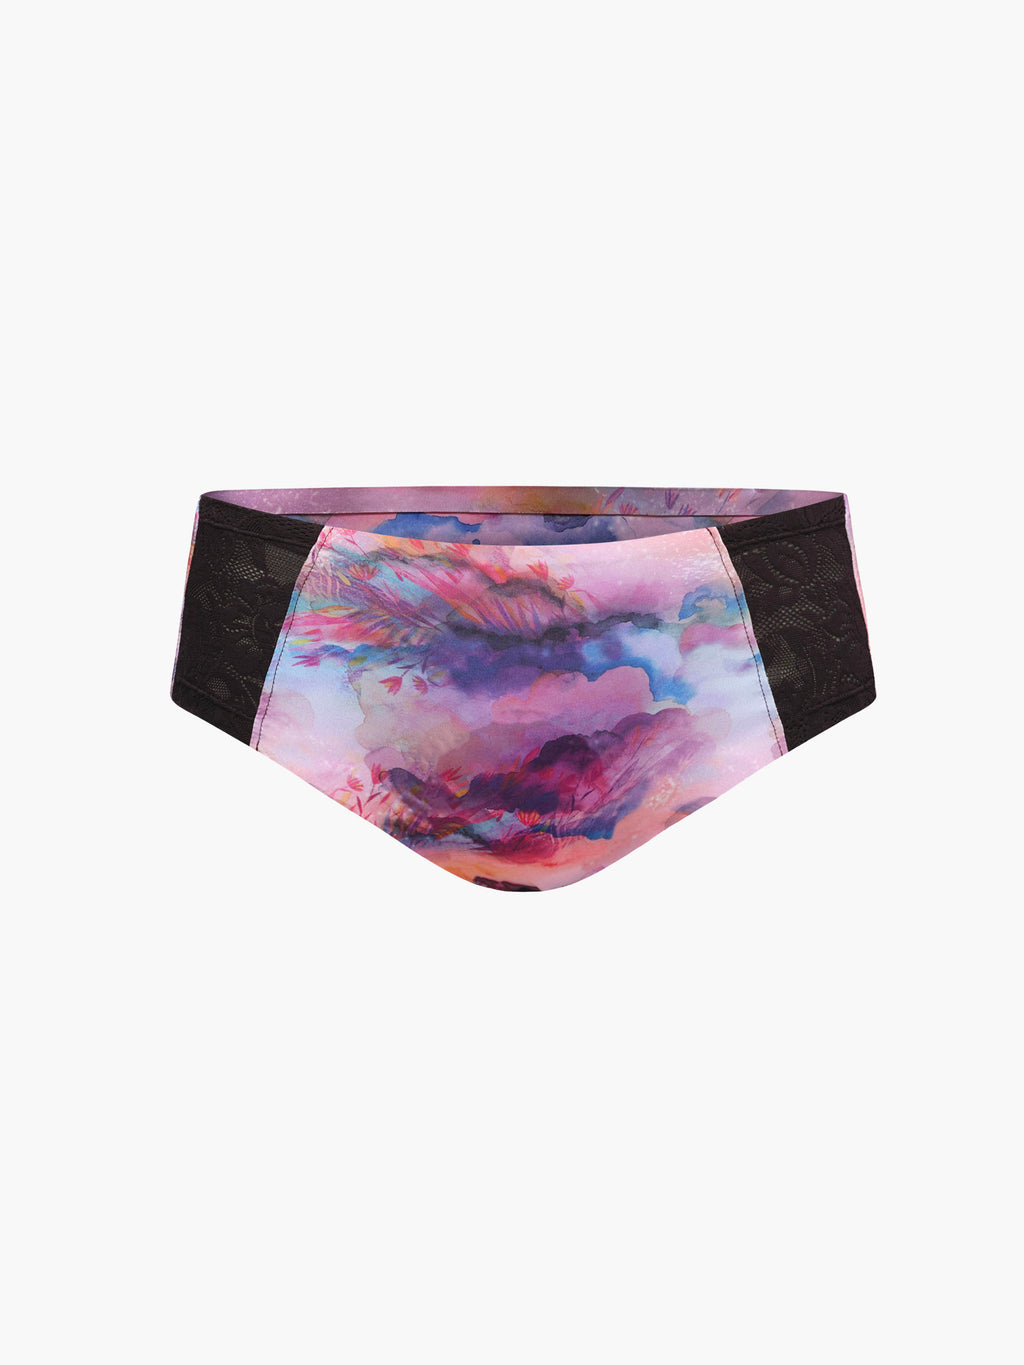 SHREDLY - Hipster Sport Underwear : Watercolor Lace - image